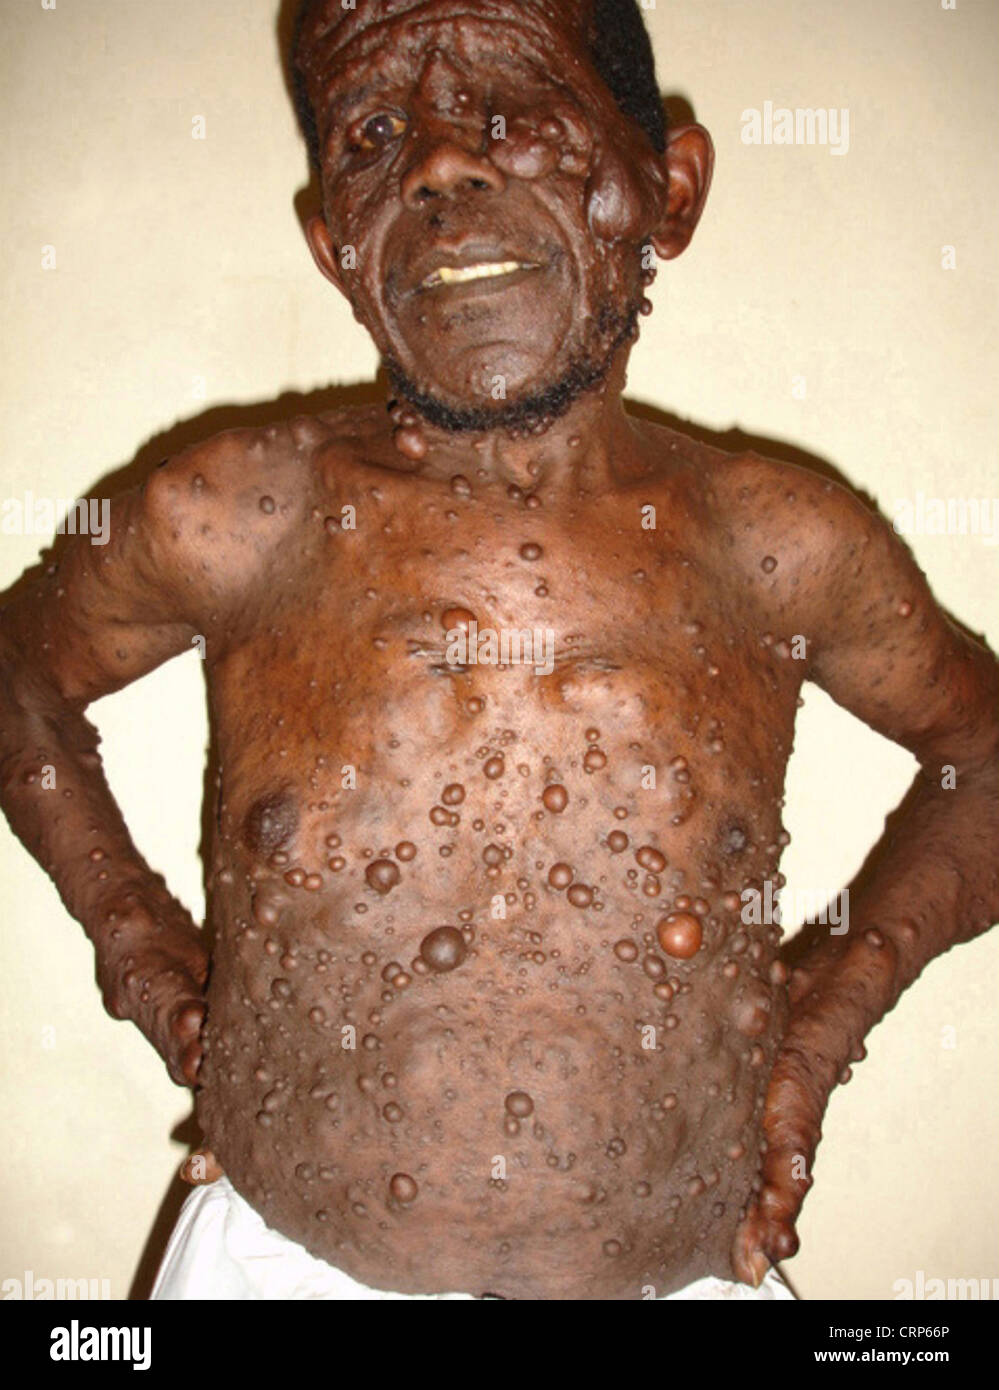 A patient with neurofibromatosis. Stock Photo